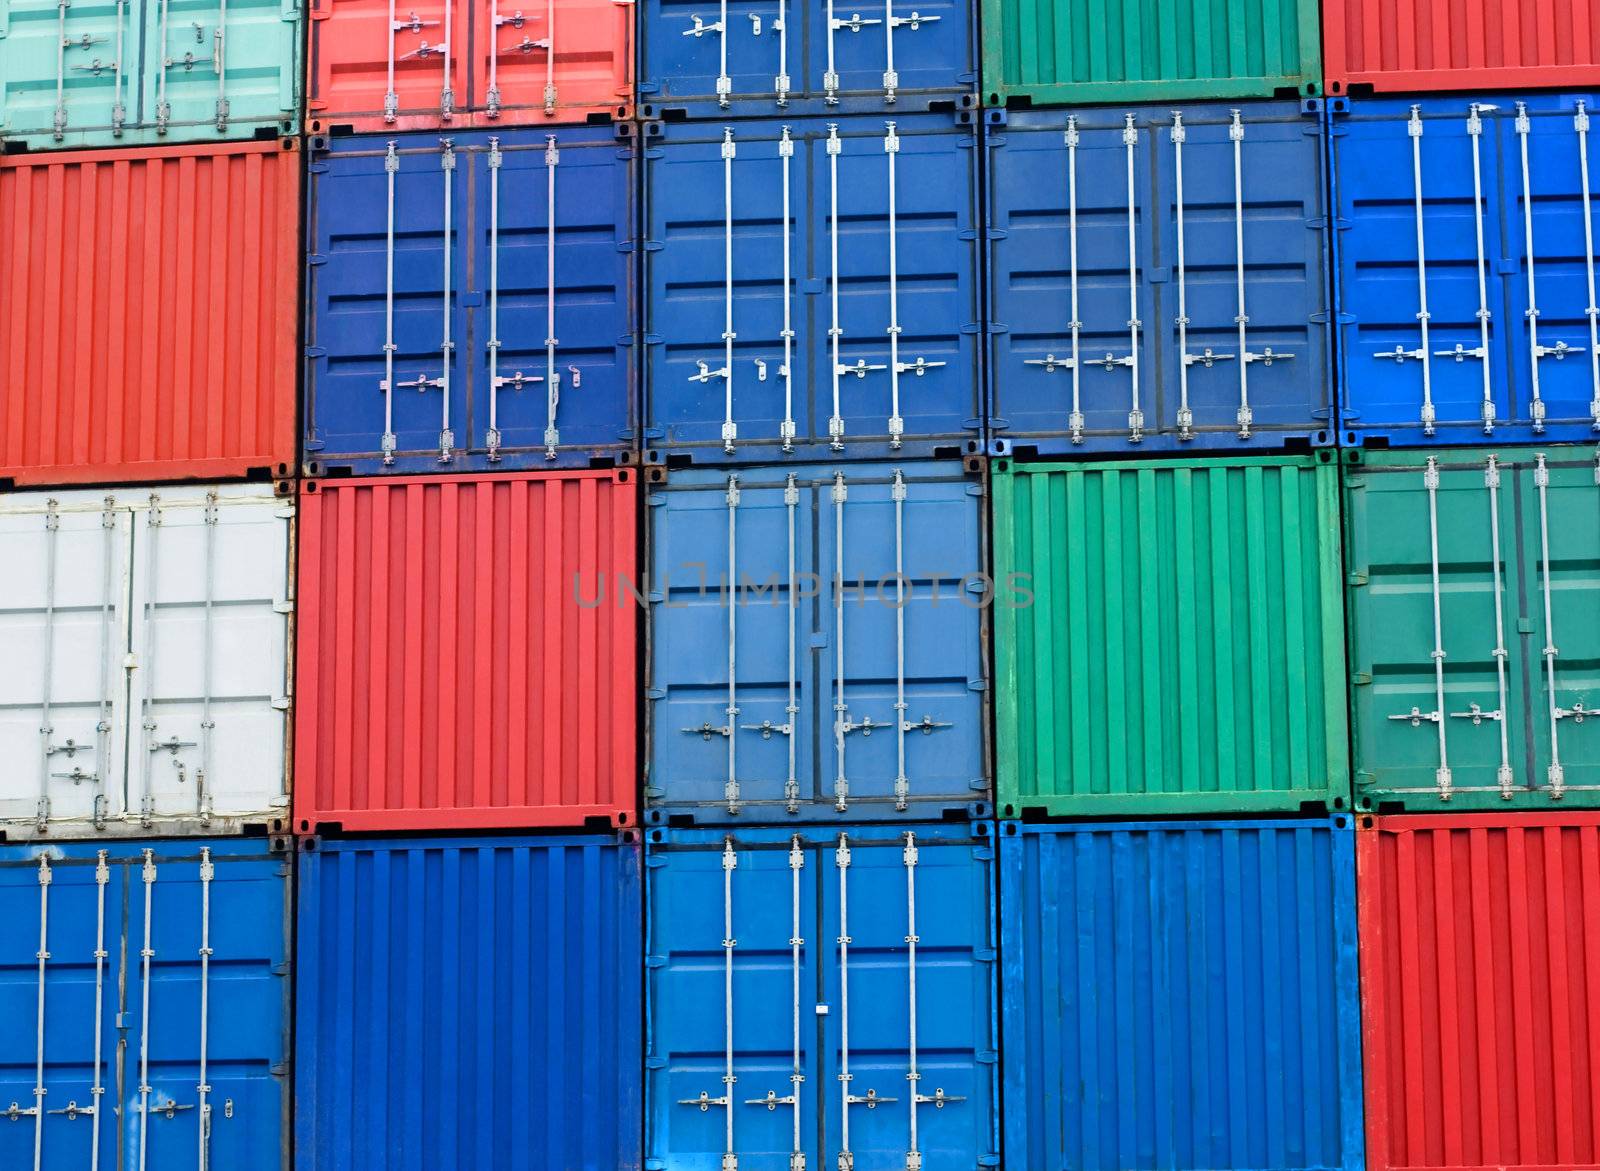 background of multi-colored freight shipping containers at the docks